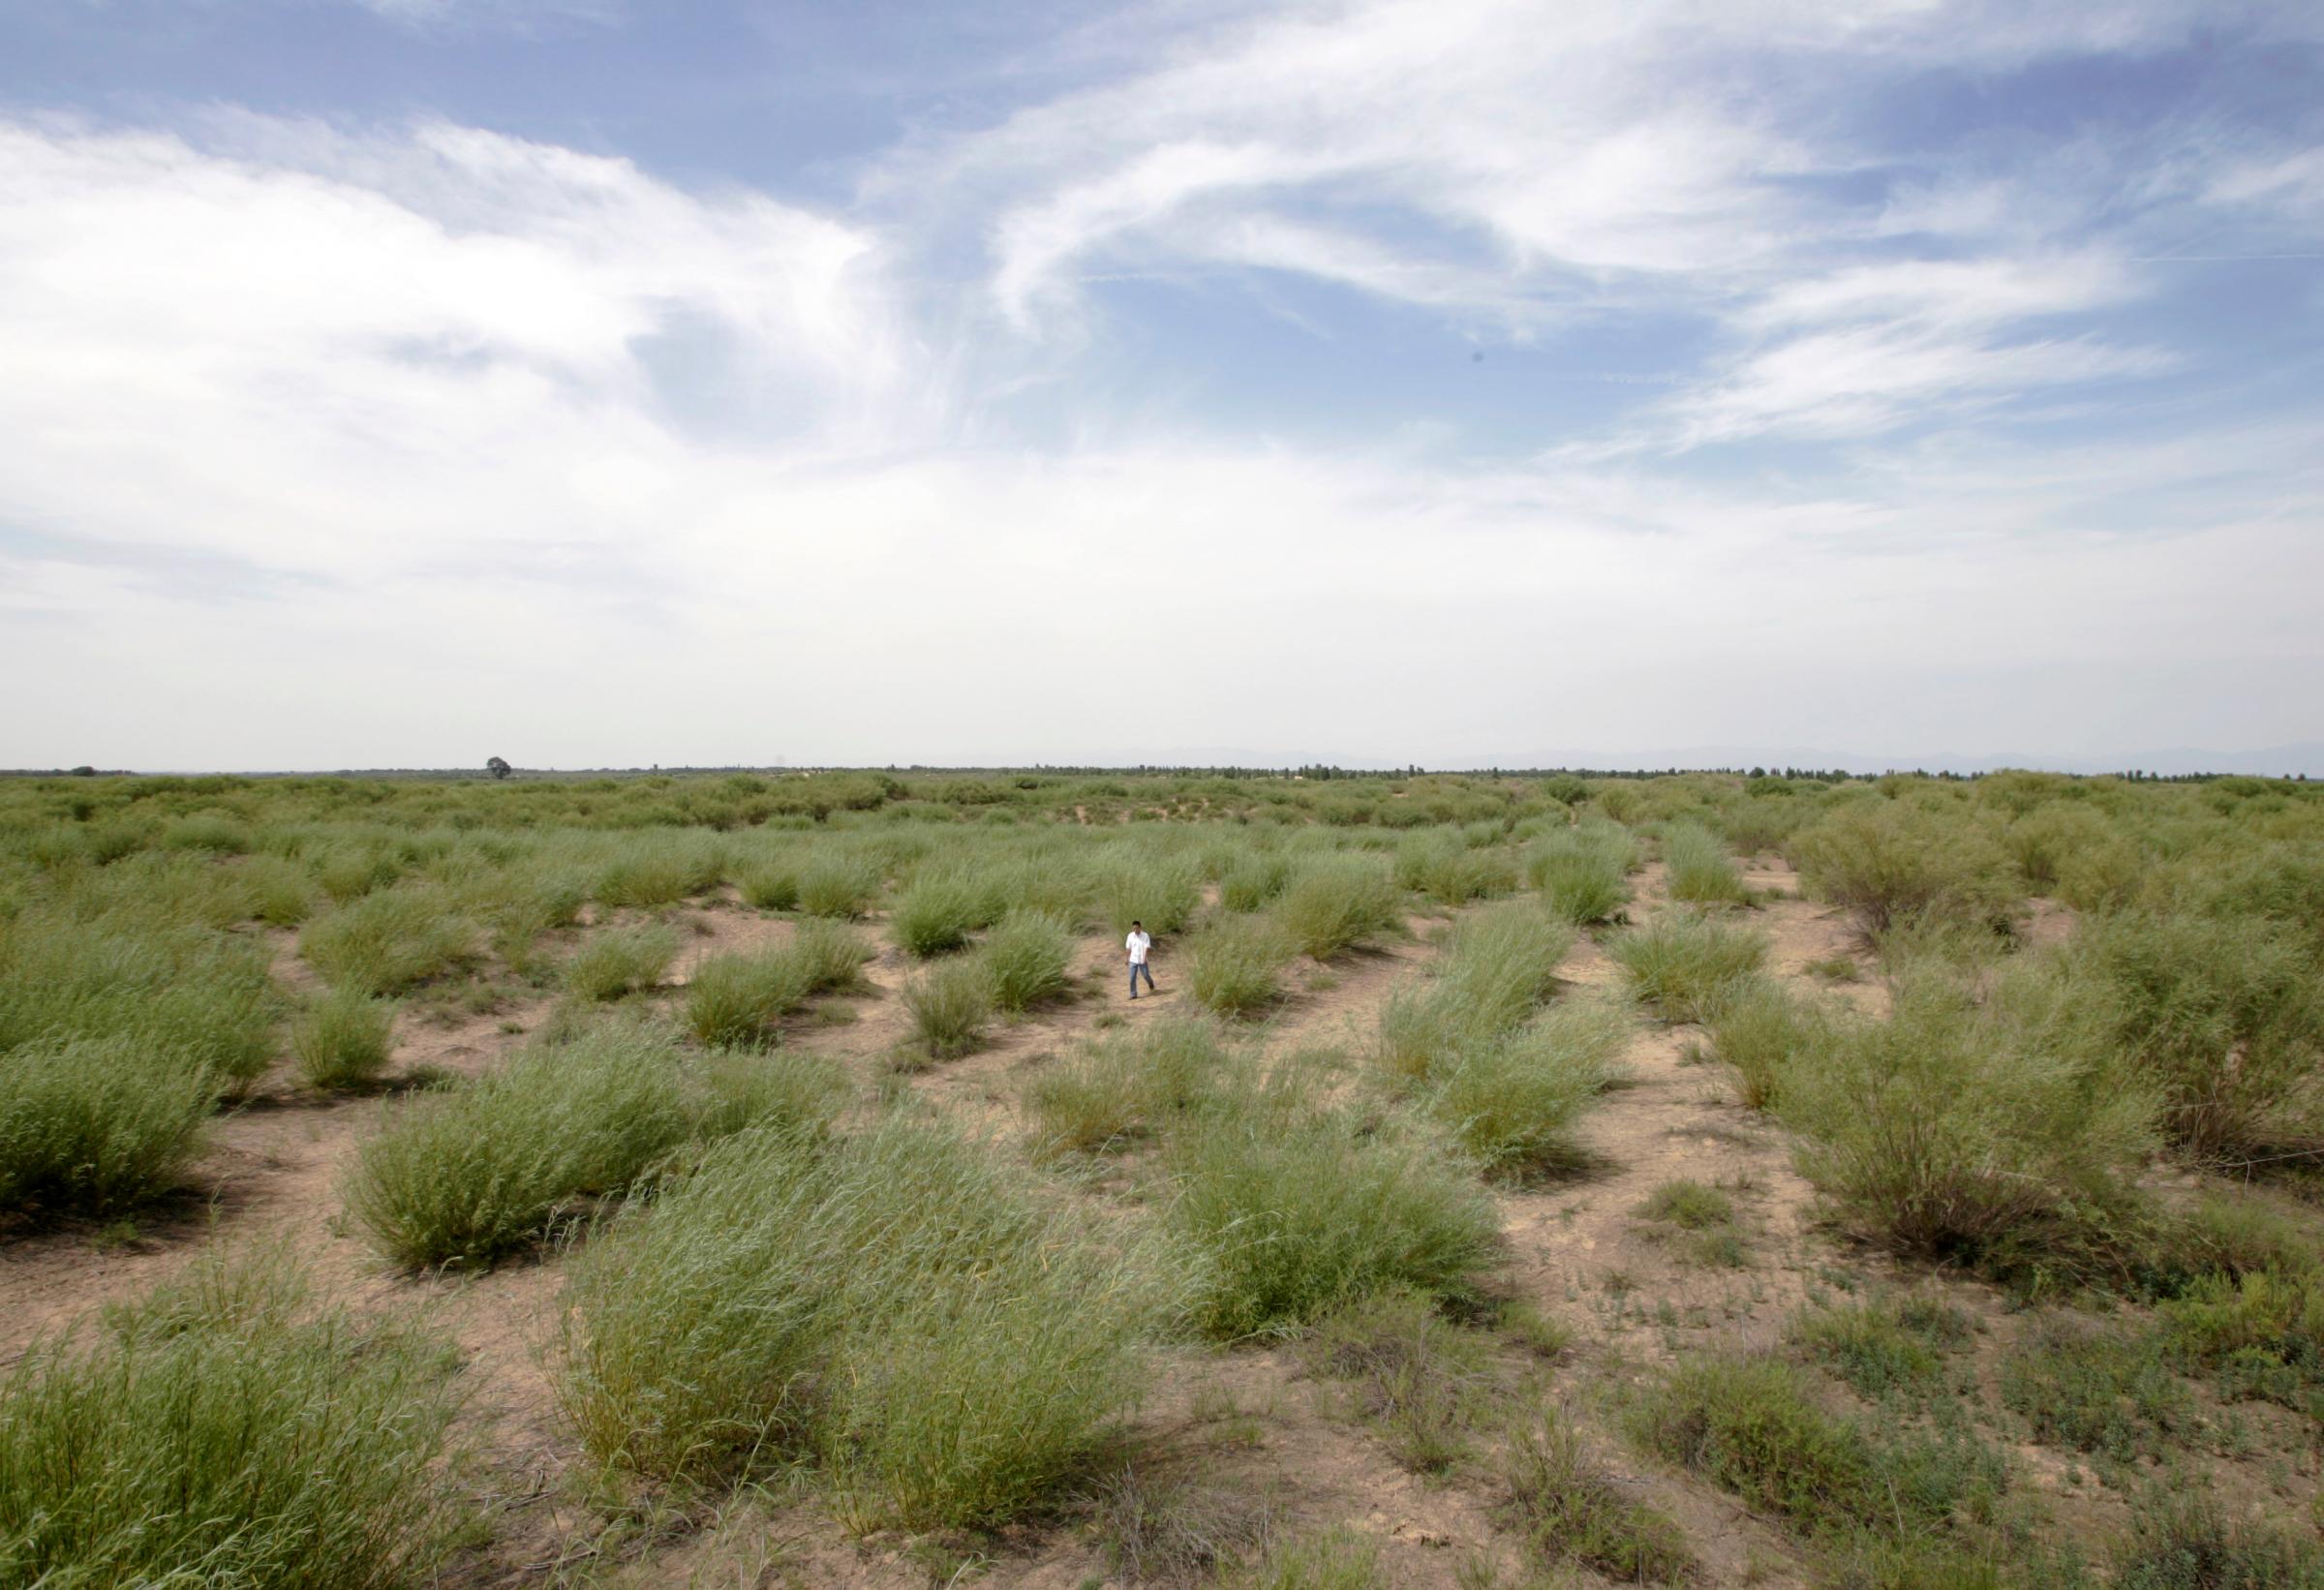 A general view shows the desertification transformation project on the outskirts of Dalate